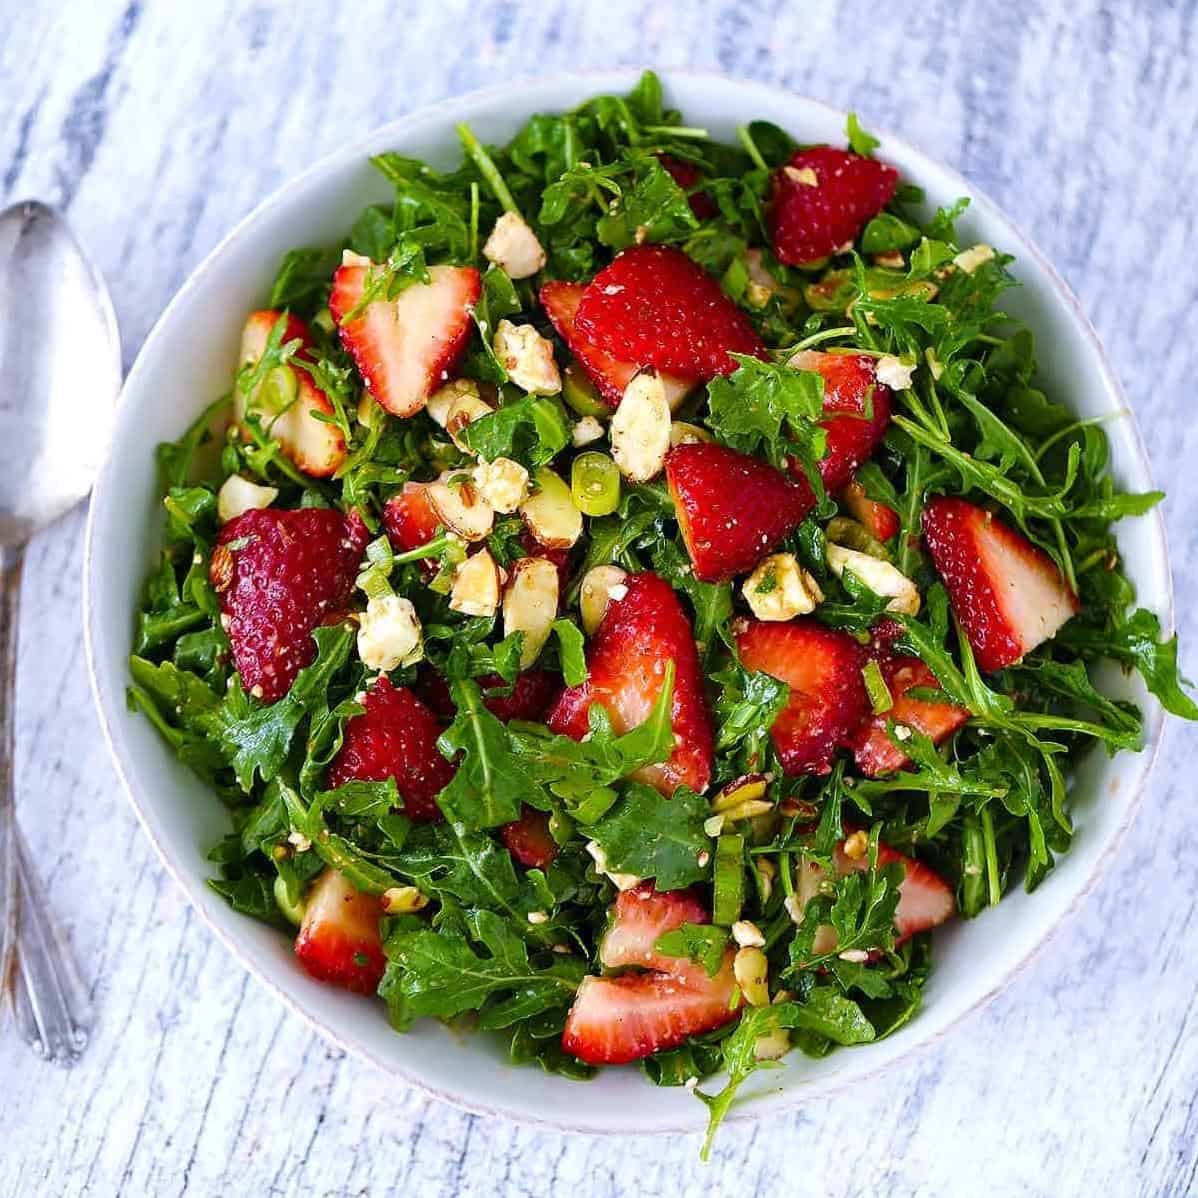  Add a pop of sweetness to your salad with the strawberry sauce.